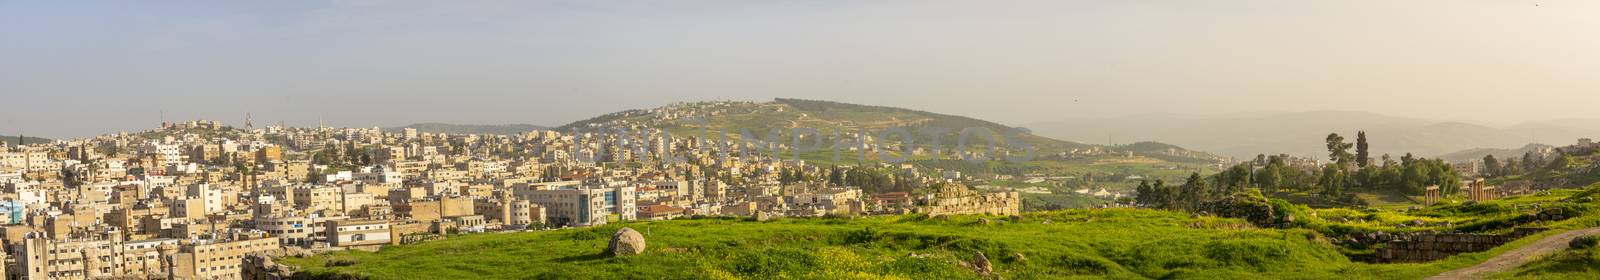 panoramic cityscape of the skyline of the Jordanian city of Jerash by kb79